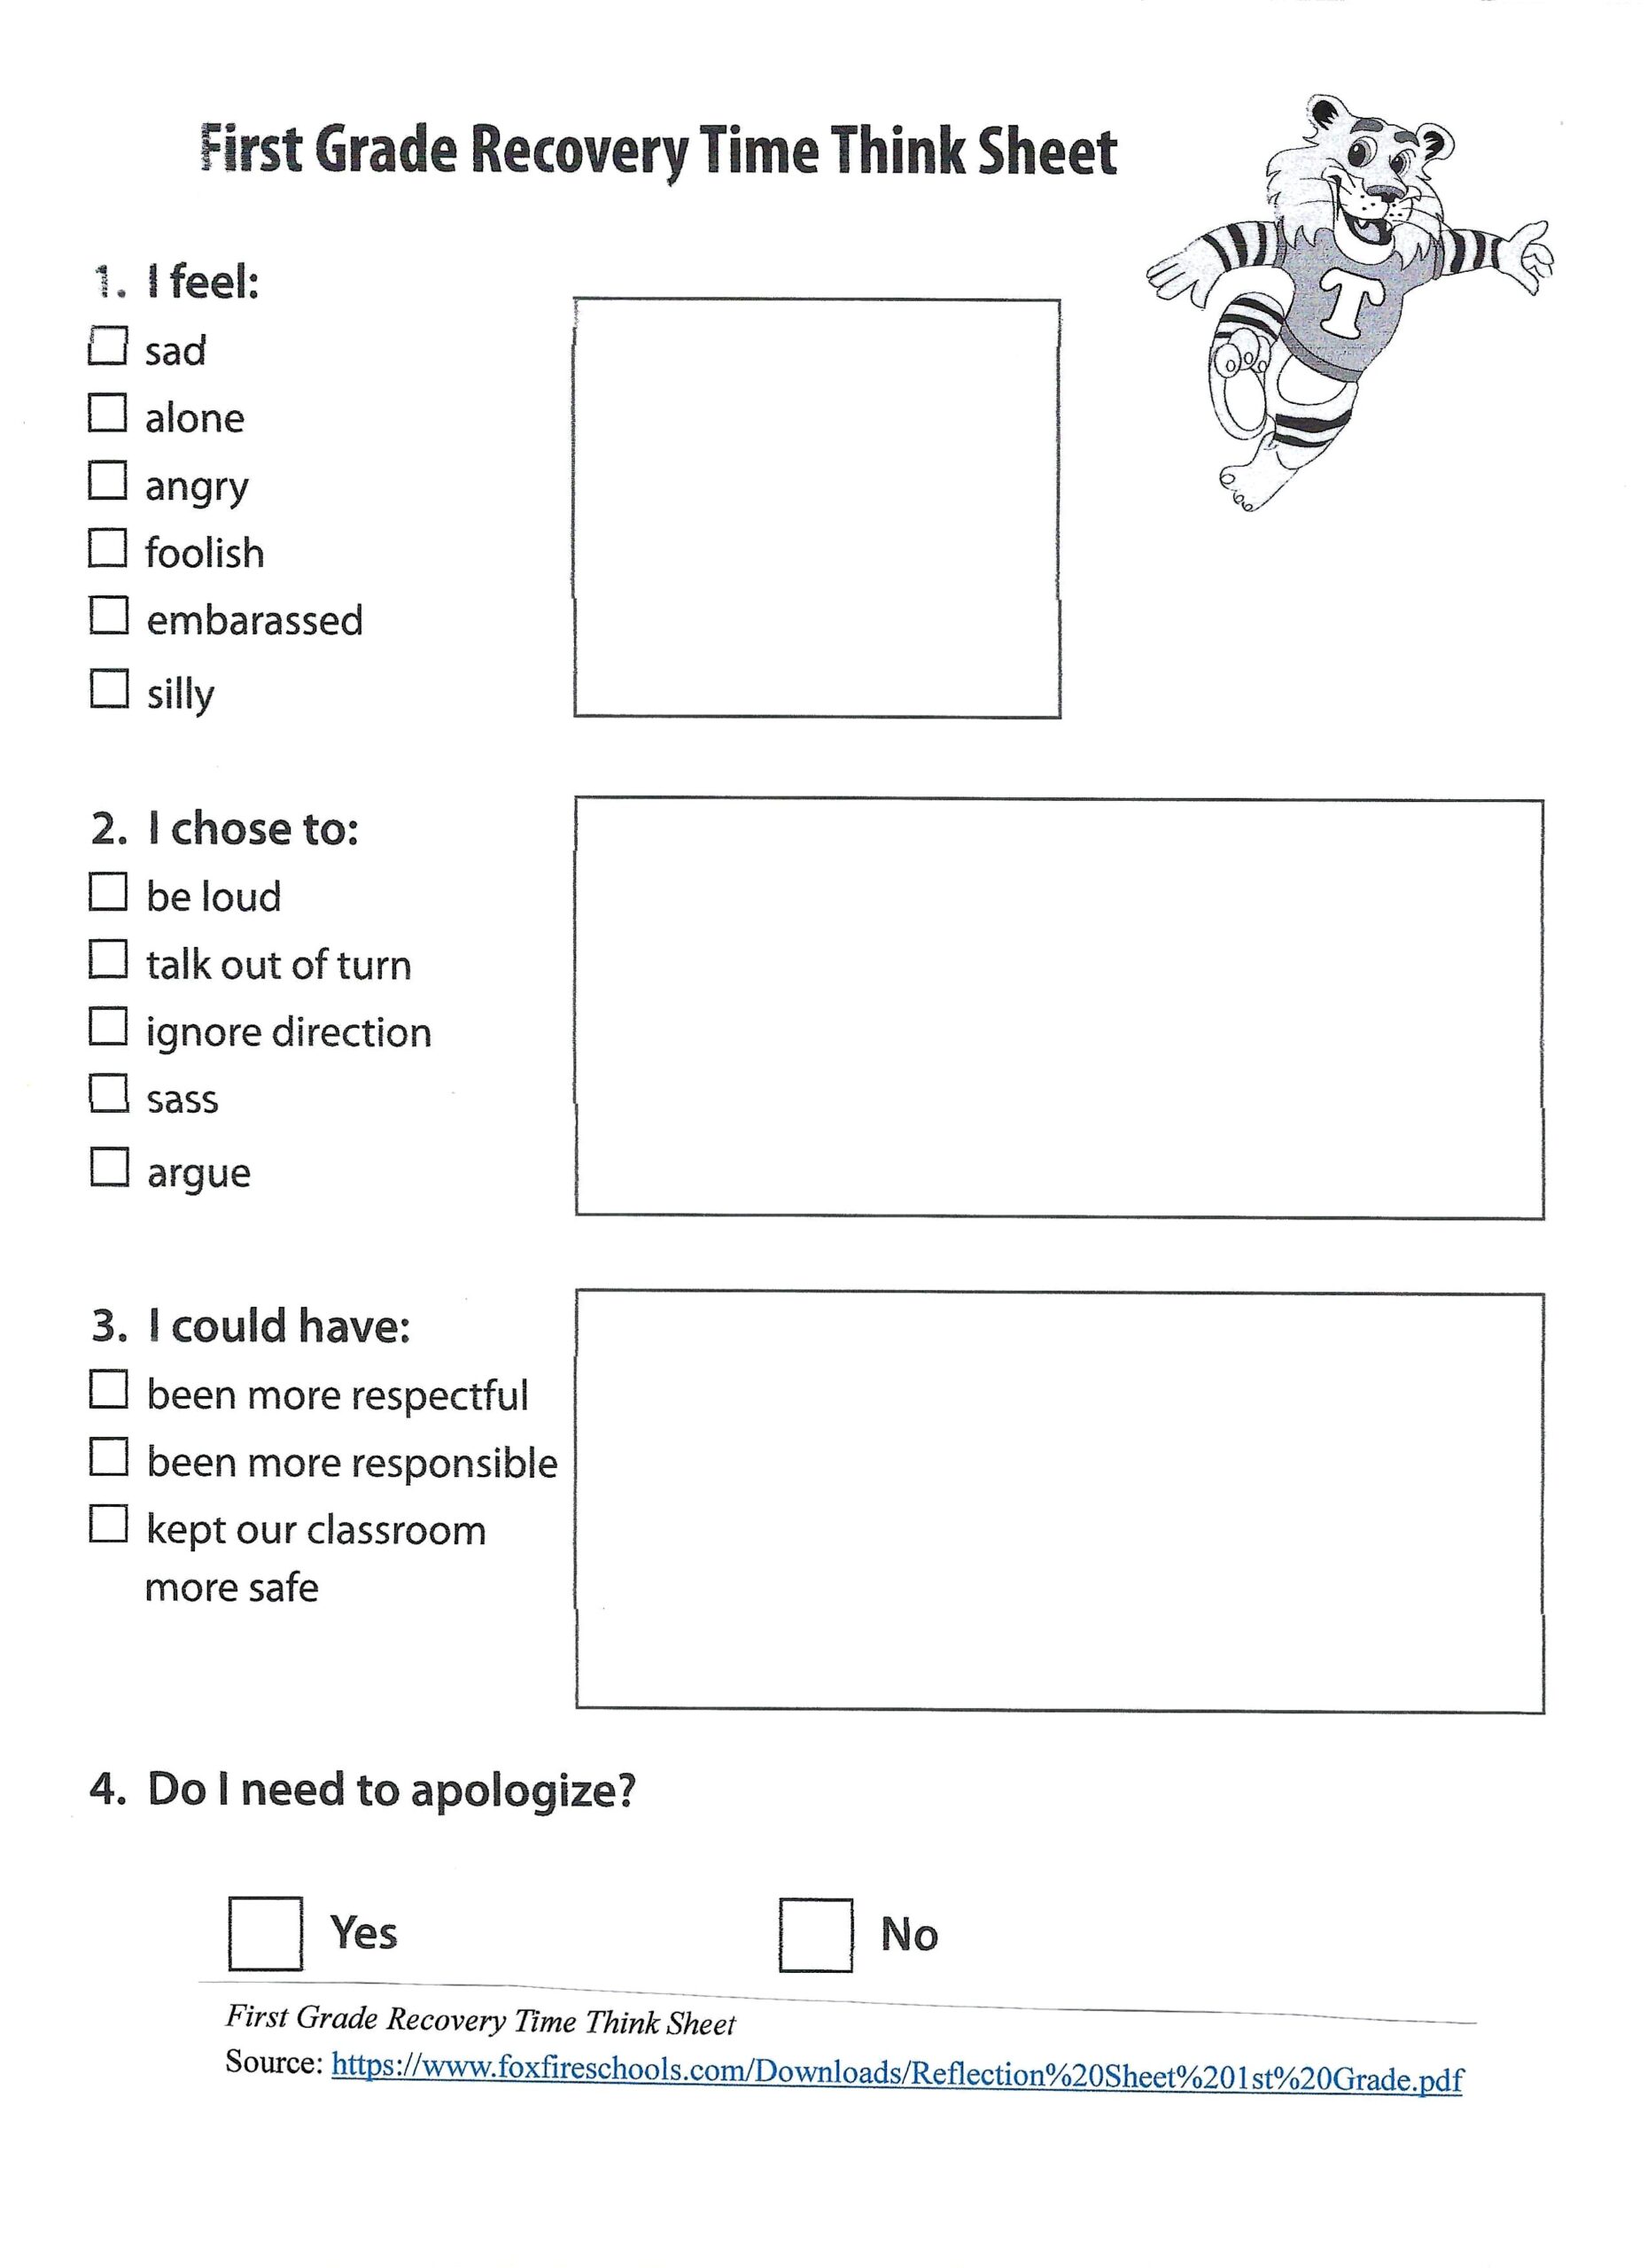 First Grade Recovery Time Think Sheet